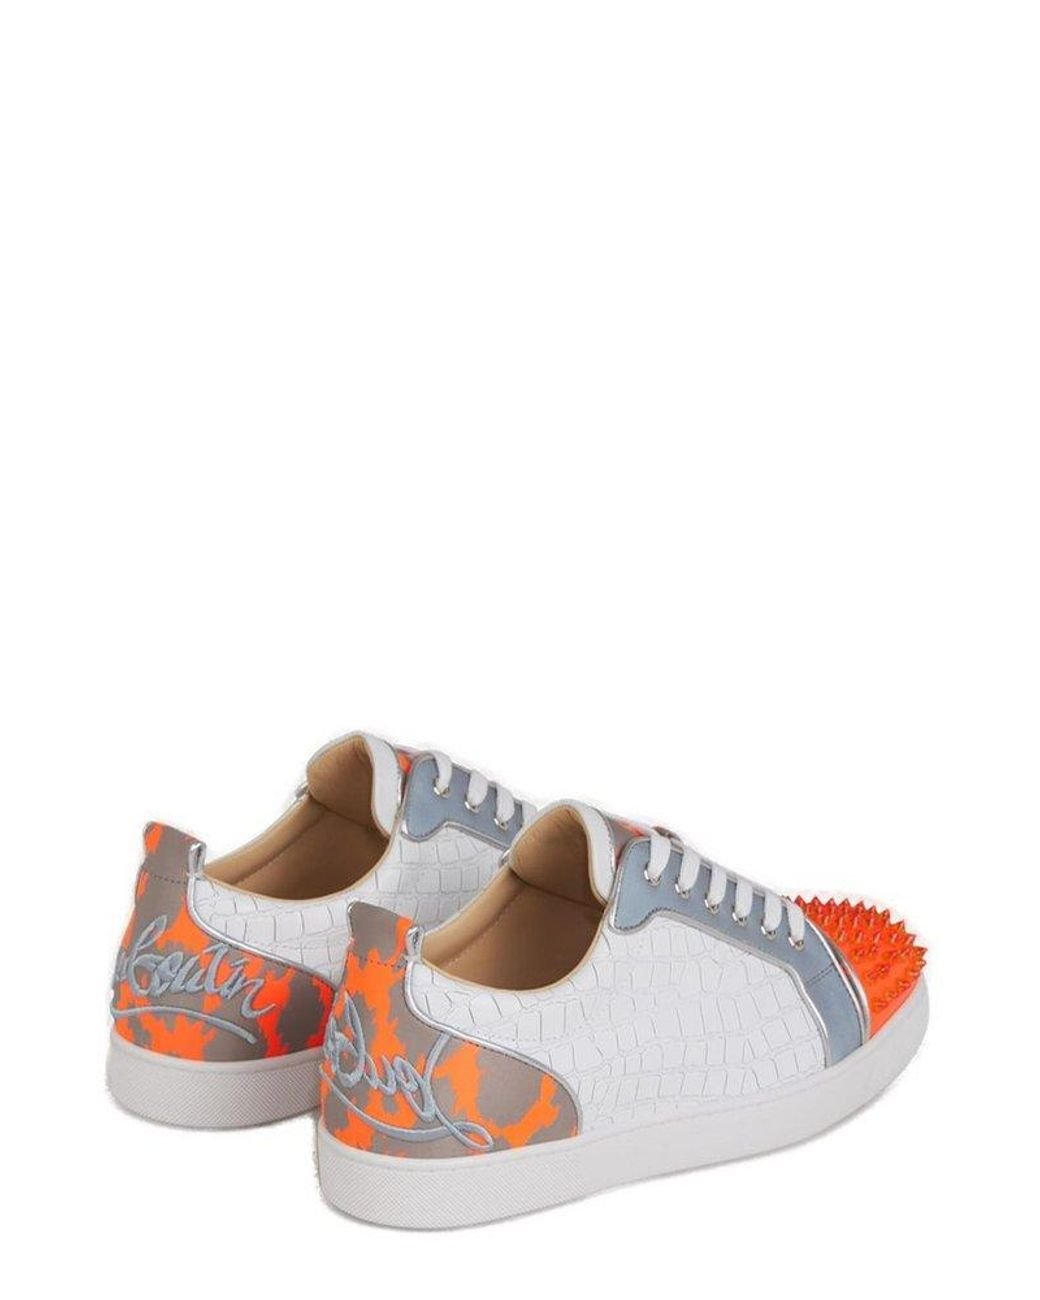 Louis Junior Spikes Sneakers in White - Christian Louboutin